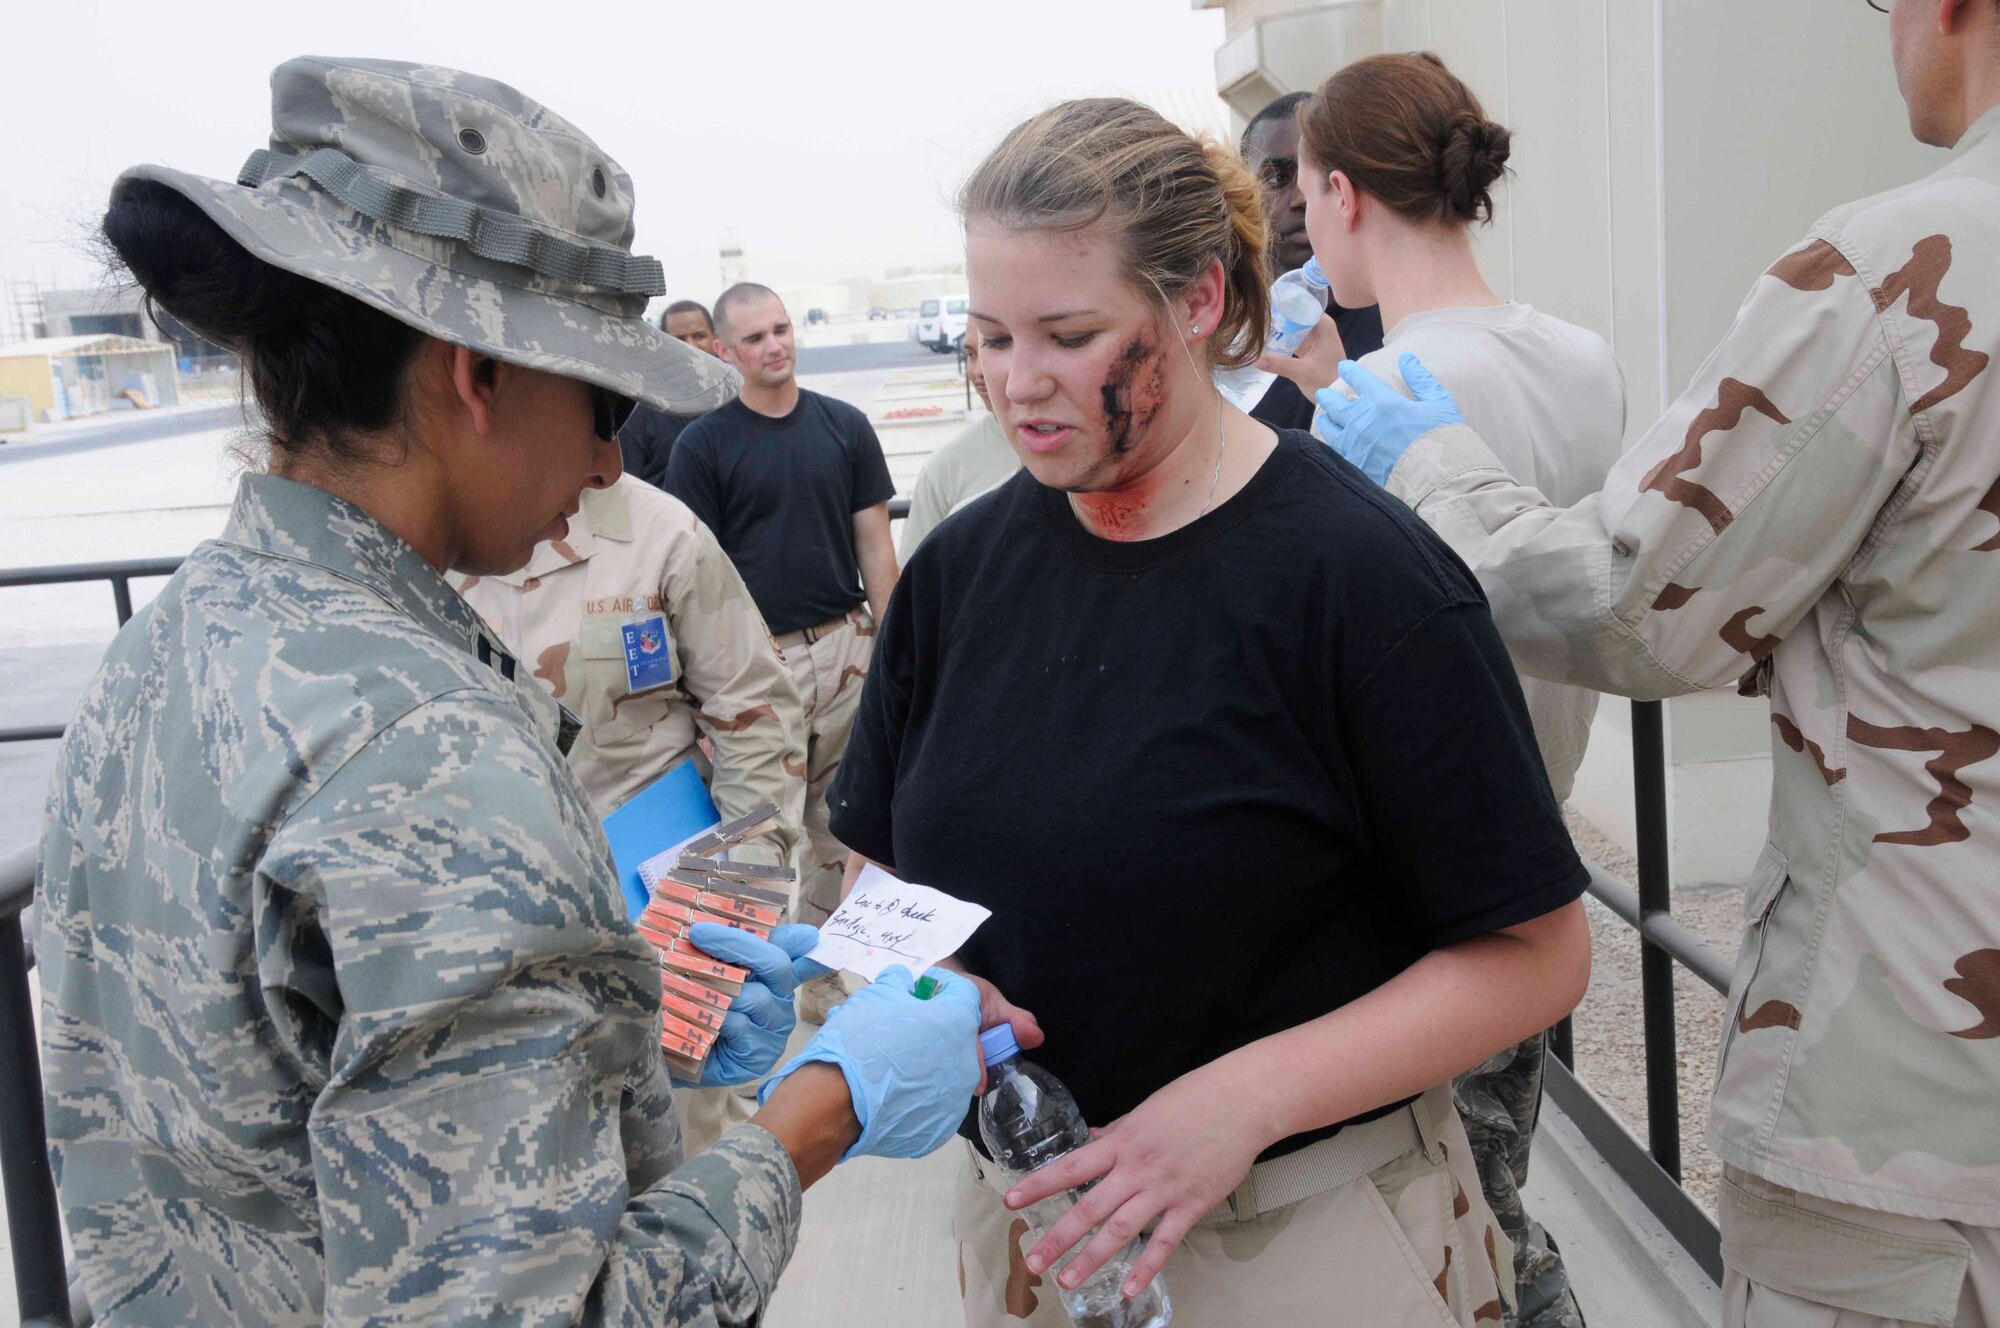 Captain Humaira Masood, 379th Expeditionary Medical Group, checks the status of a simulated injured Airman to determine the type of care needed during a Major Accident Response Exercise in Southwest Asia July 28. The goals of the exercise were to hone the skills of first responders and to practice incident command and control. Approximately 500 people from organizations across the base were involved in the exercise, which simulated an aircraft mishap resulting in two dozen injured Airmen. Captain Masood is deployed from Lackland Air Force Base, Texas. (U.S. Air Force photo by Staff Sgt. Darnell T. Cannady)